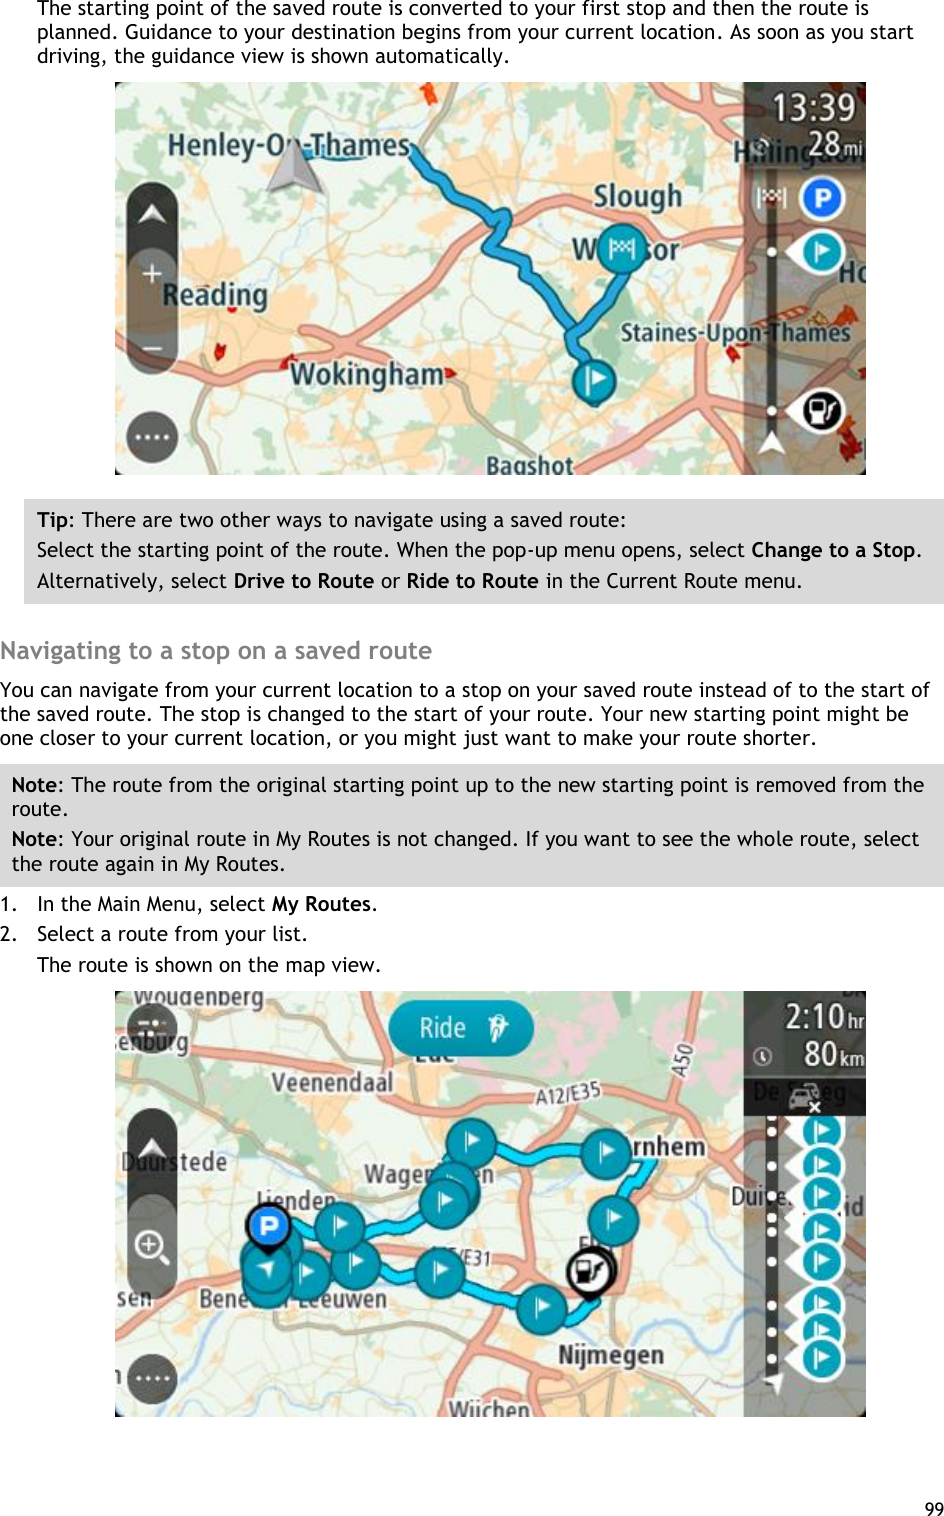  99  The starting point of the saved route is converted to your first stop and then the route is planned. Guidance to your destination begins from your current location. As soon as you start driving, the guidance view is shown automatically.  Tip: There are two other ways to navigate using a saved route: Select the starting point of the route. When the pop-up menu opens, select Change to a Stop. Alternatively, select Drive to Route or Ride to Route in the Current Route menu.  Navigating to a stop on a saved route You can navigate from your current location to a stop on your saved route instead of to the start of the saved route. The stop is changed to the start of your route. Your new starting point might be one closer to your current location, or you might just want to make your route shorter. Note: The route from the original starting point up to the new starting point is removed from the route.   Note: Your original route in My Routes is not changed. If you want to see the whole route, select the route again in My Routes. 1. In the Main Menu, select My Routes. 2. Select a route from your list. The route is shown on the map view.  